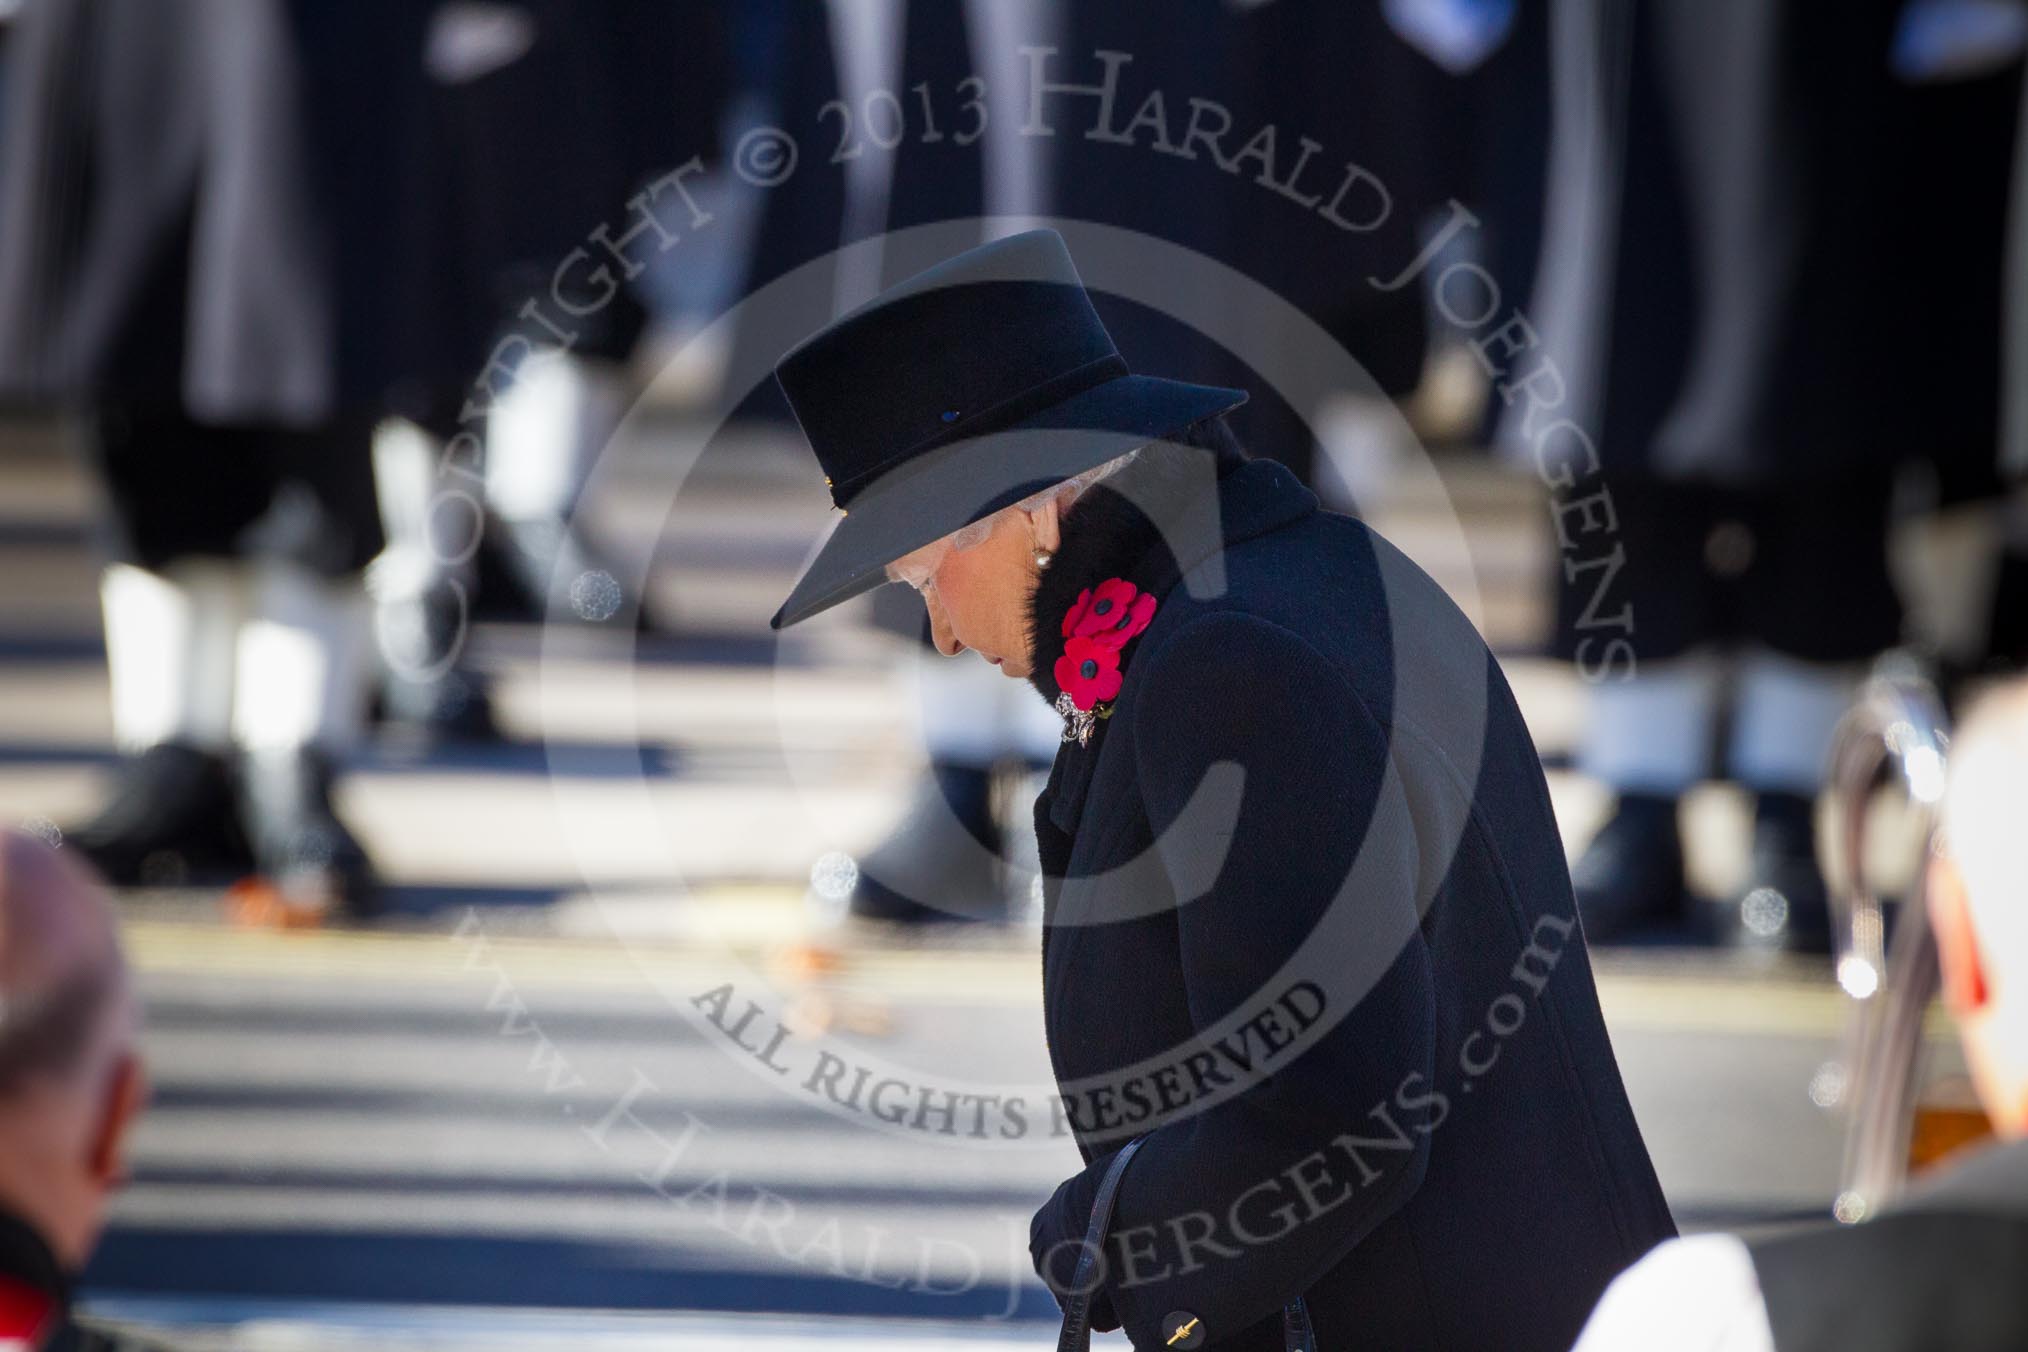 HM The Queen, bowing in respect after having laid her wreaths at the Cenotaph.